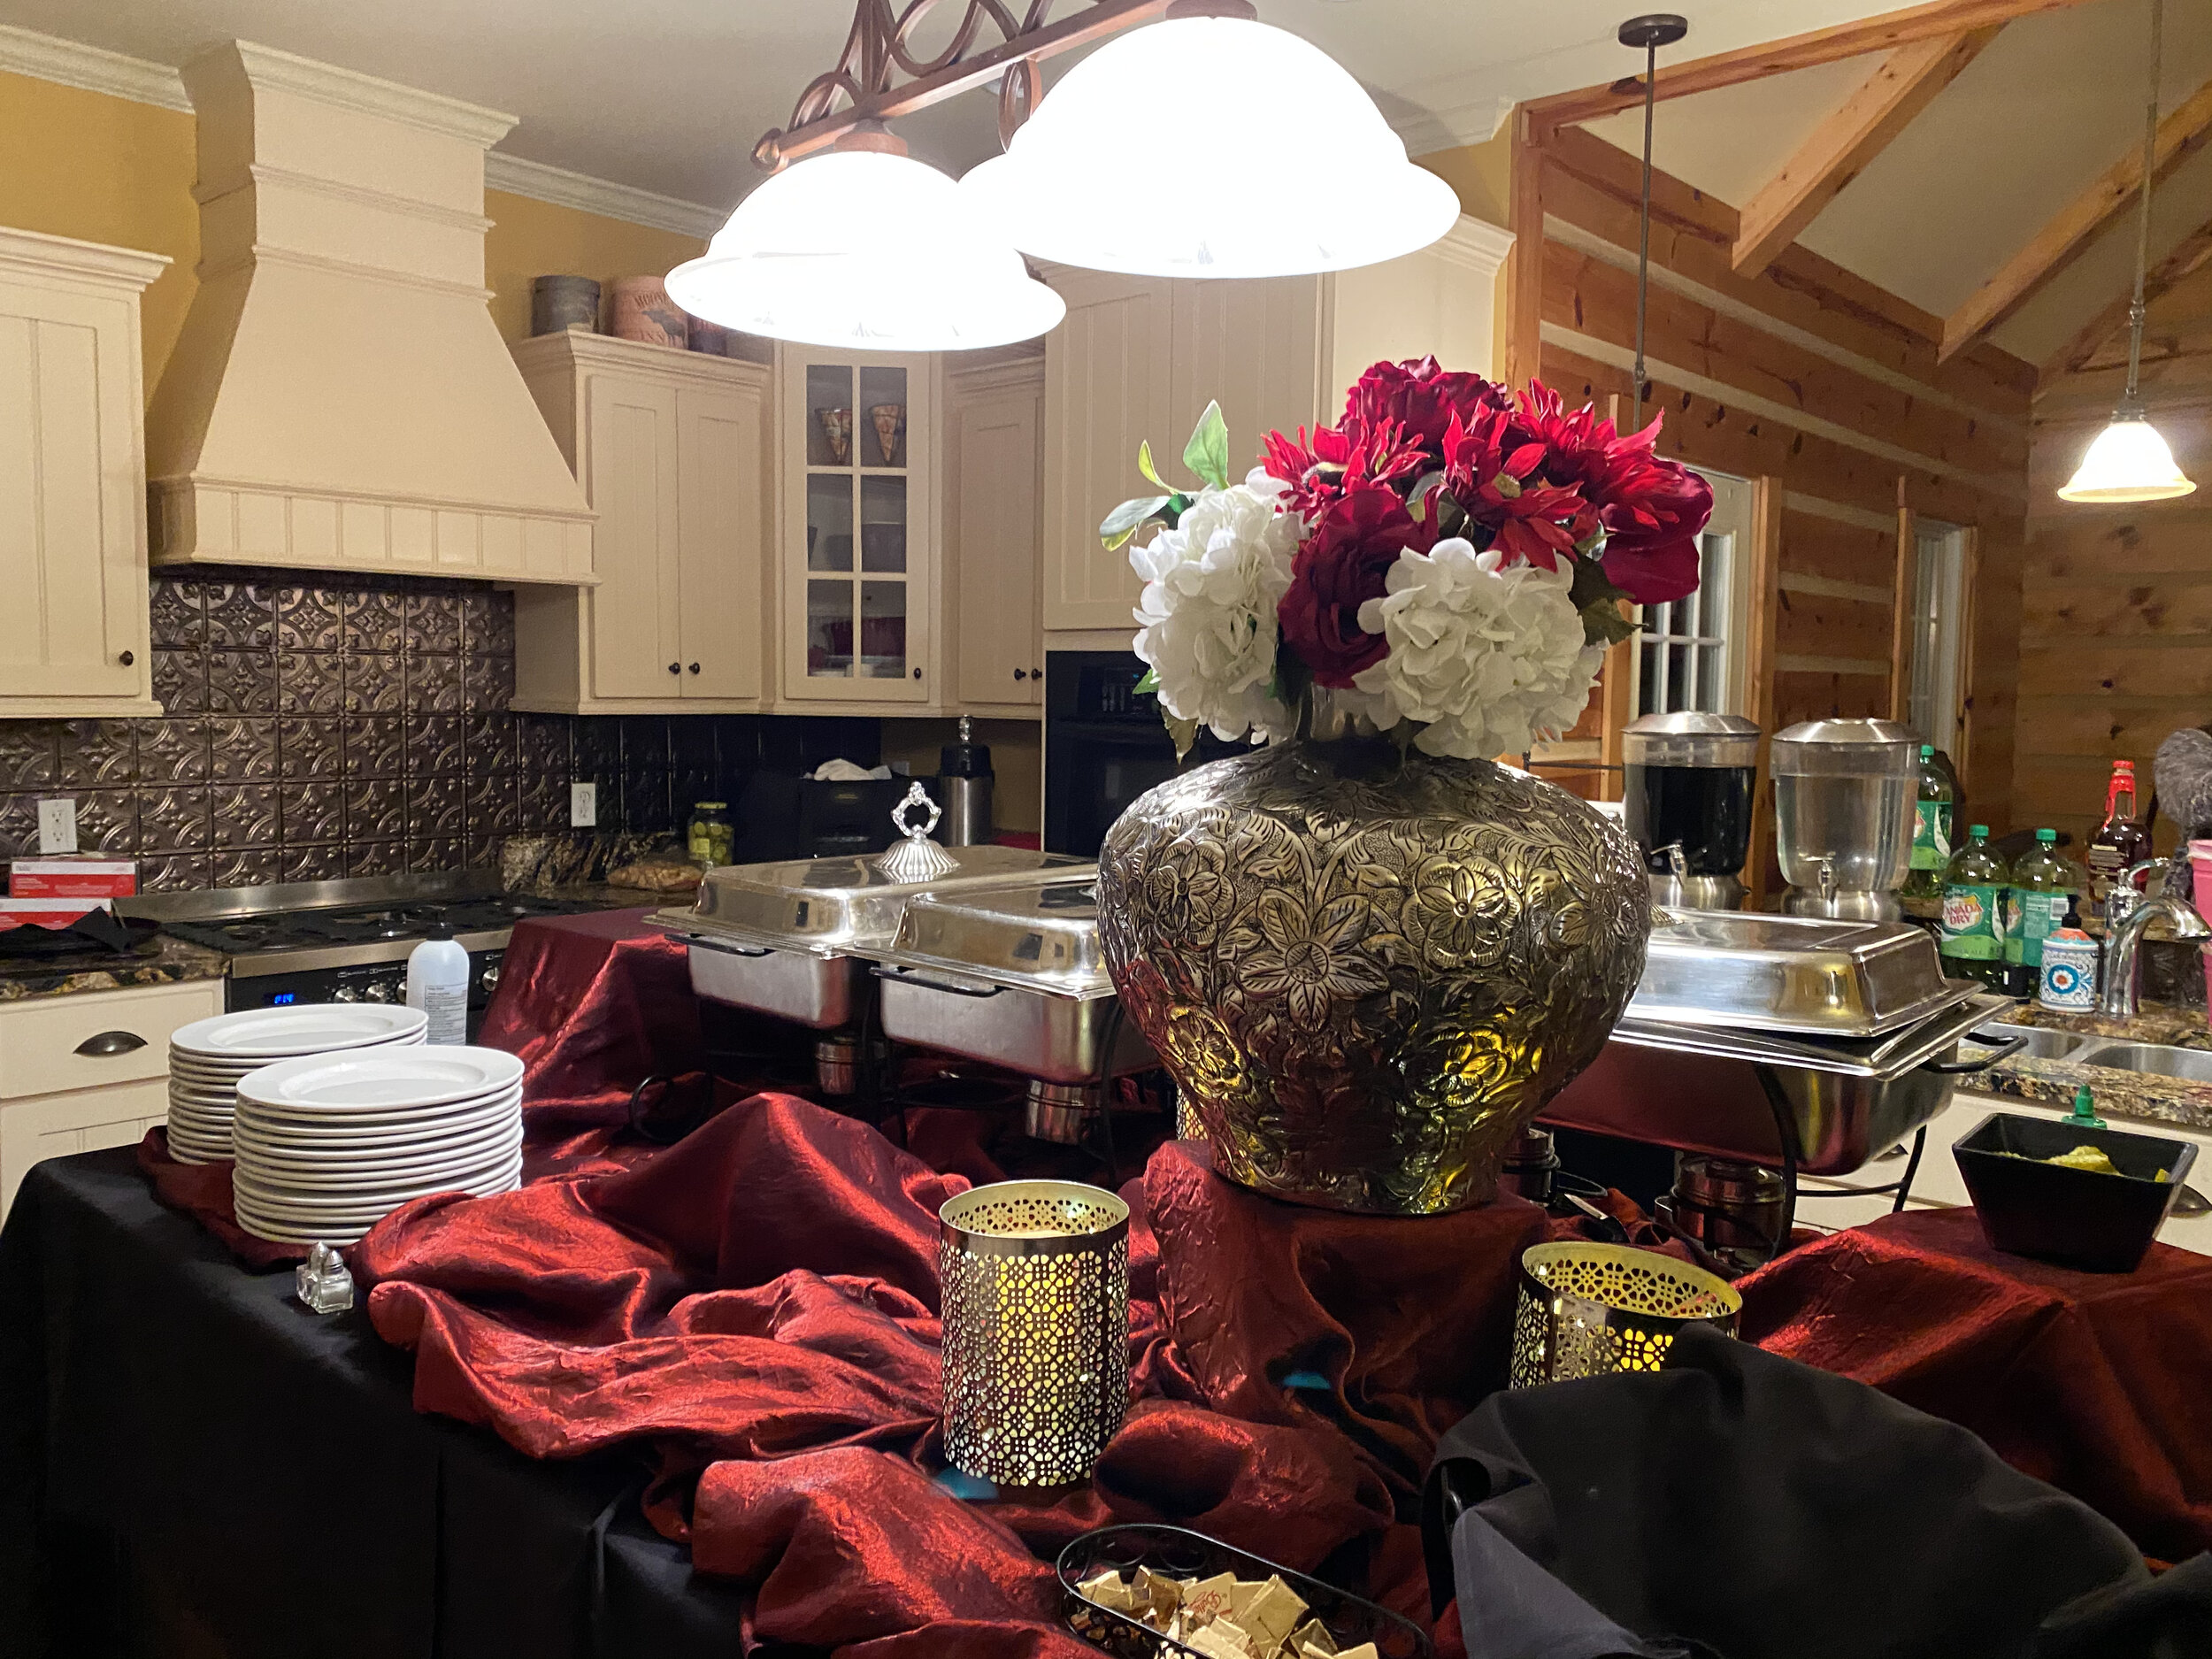 Kitchen with catered buffet on center island